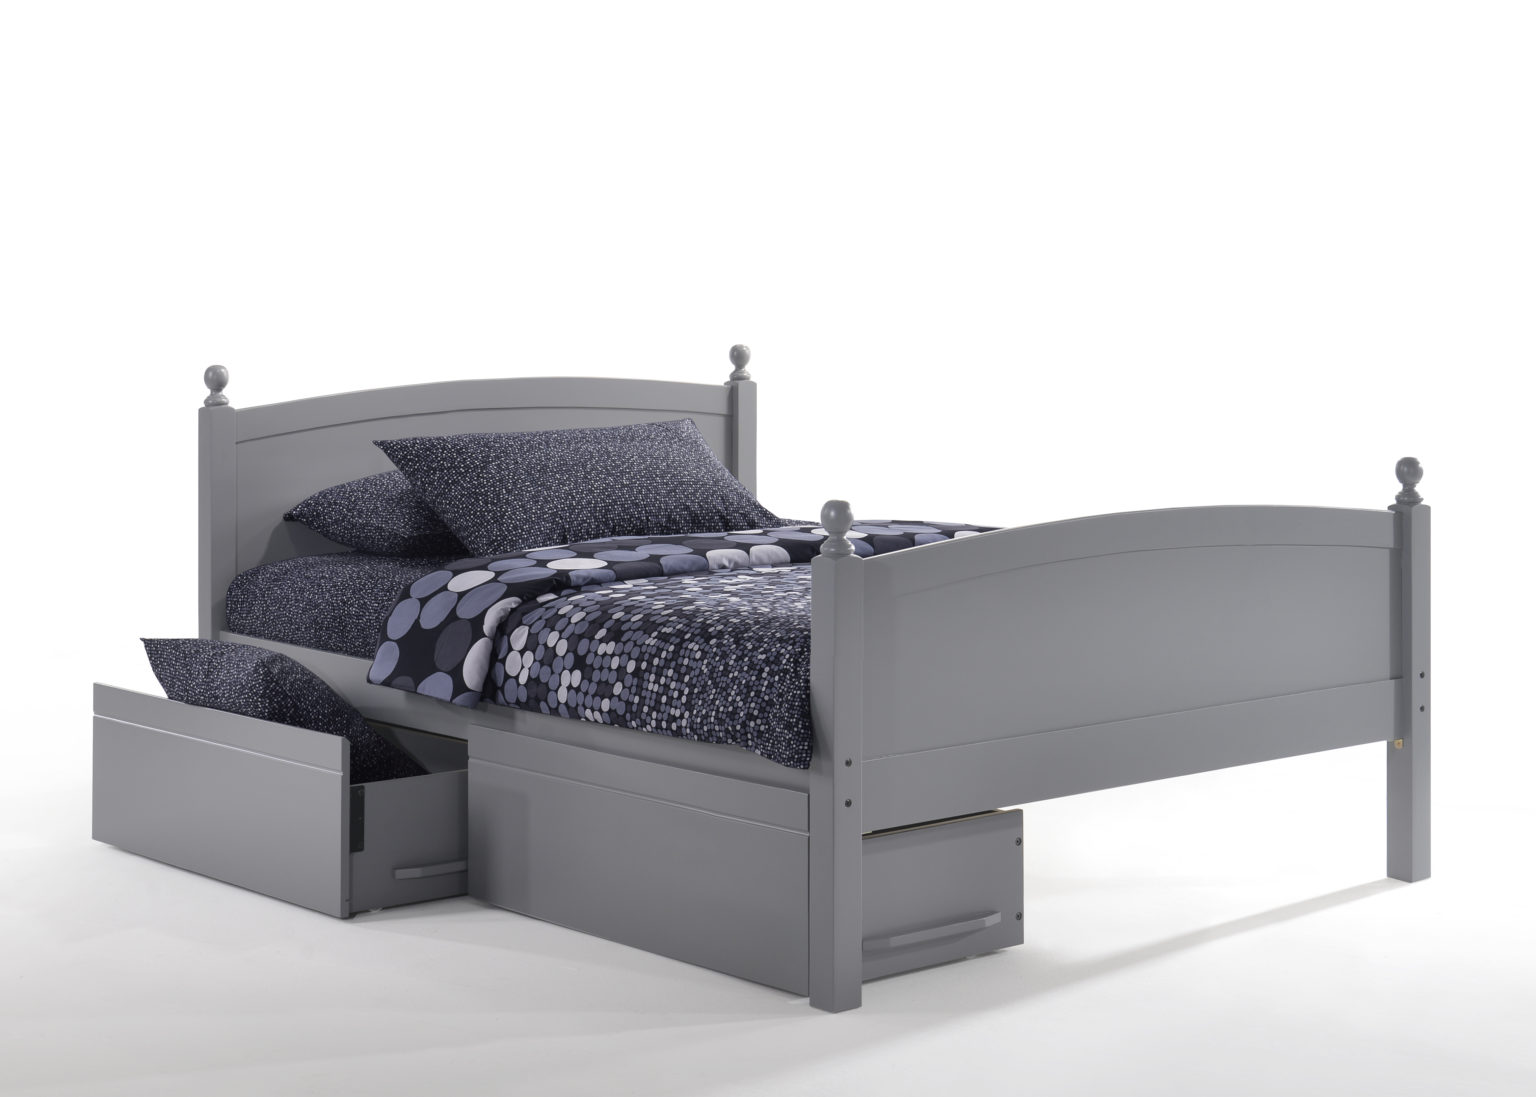 Full Zest Licorice Bed in Gray with Drawers